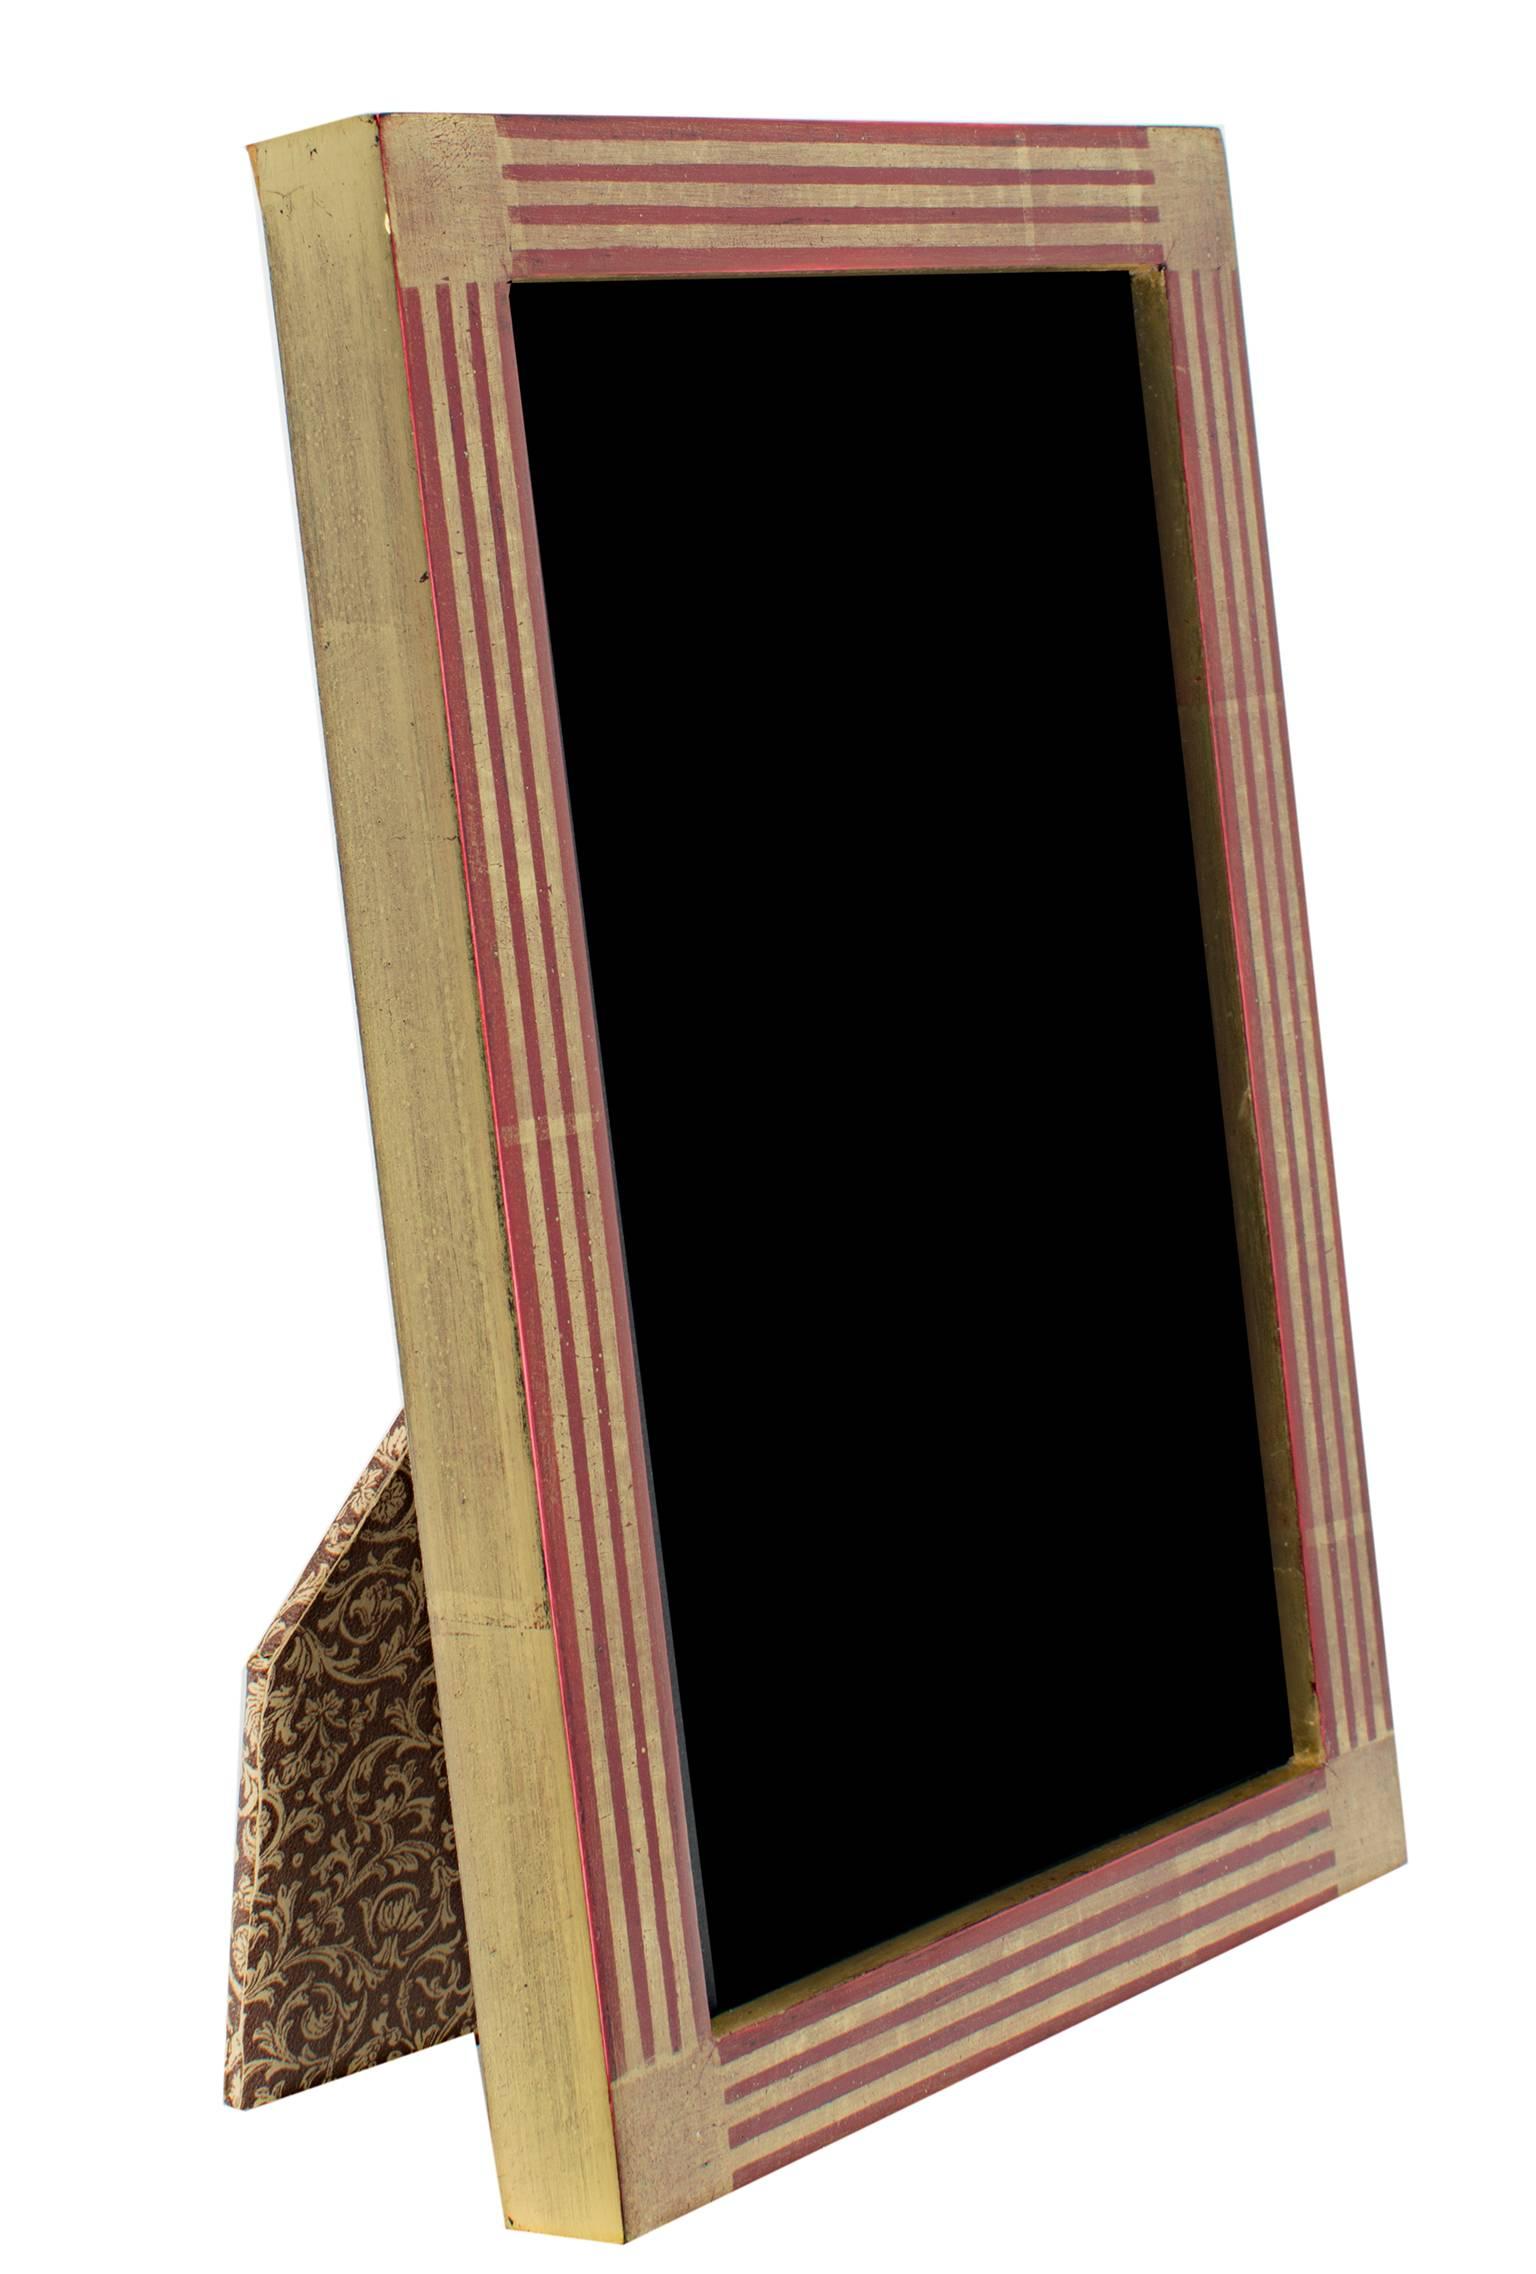 "Handmade 22K Gold Leaf Photo Frame, " Wood 4 x 6 in from Romania in 2011